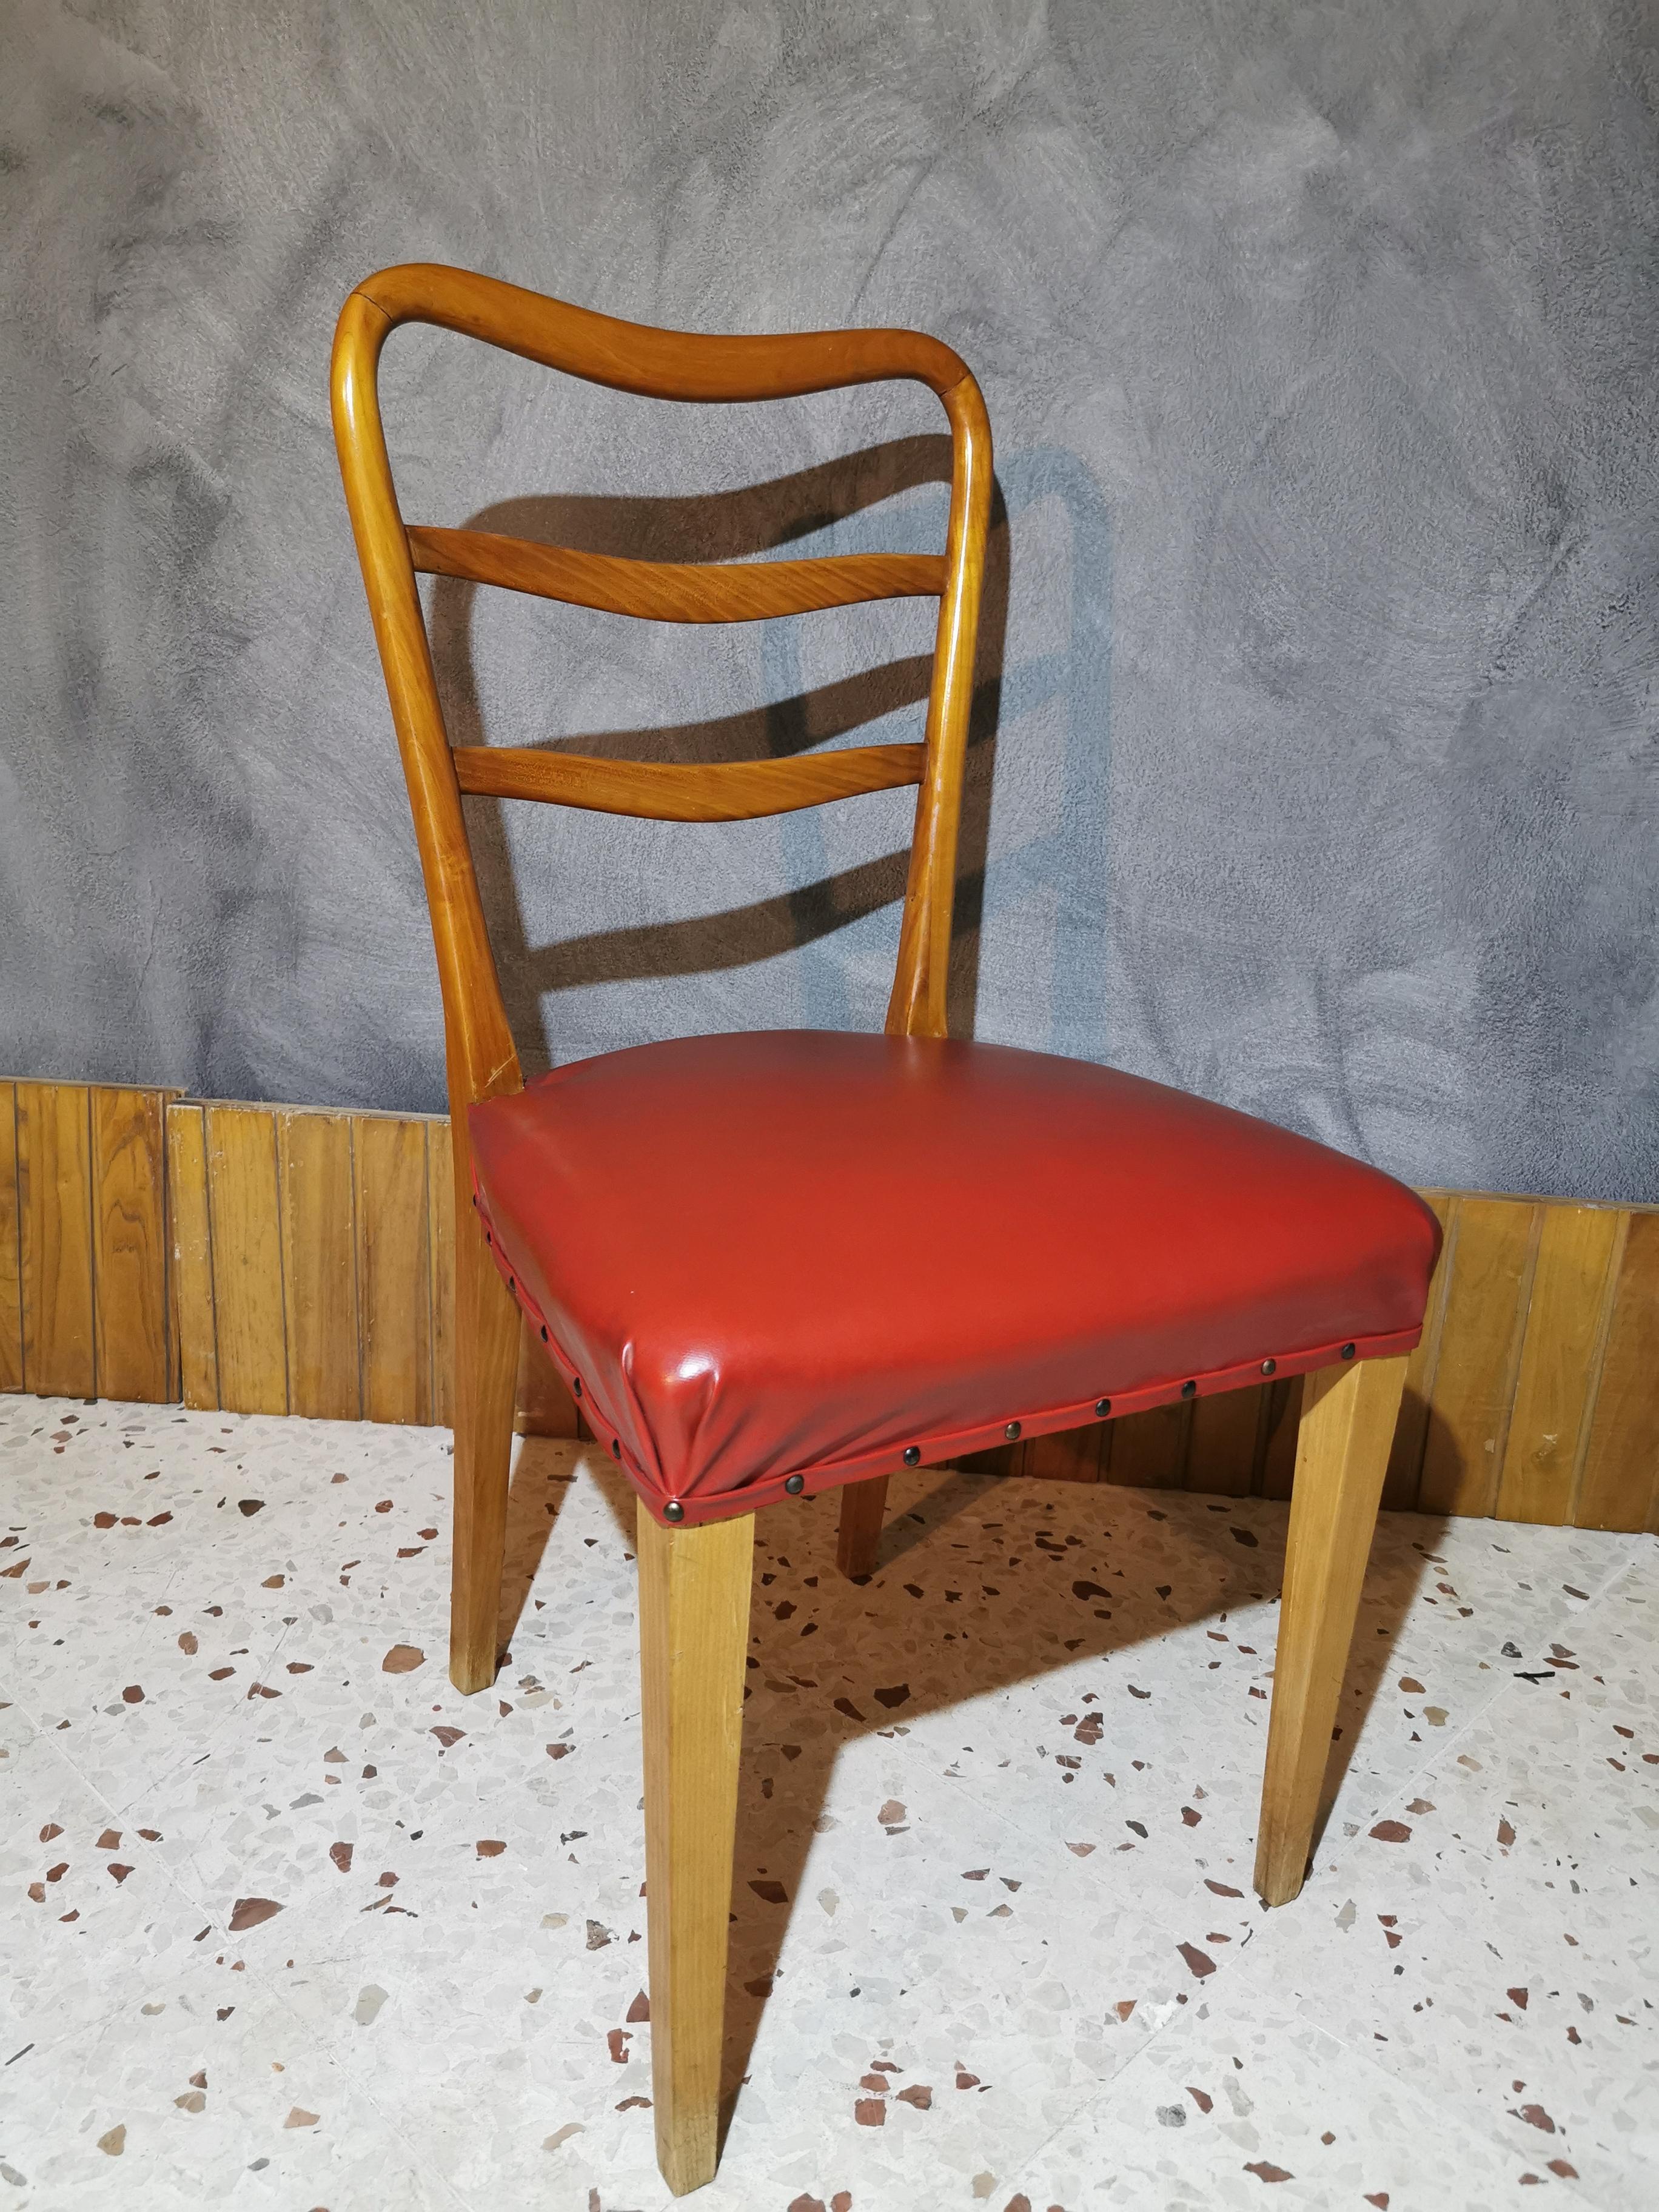 Elegant set of 6 wooden dining chairs in the style of Paolo Buffa, with red leather seat upholstery from the 1950s.